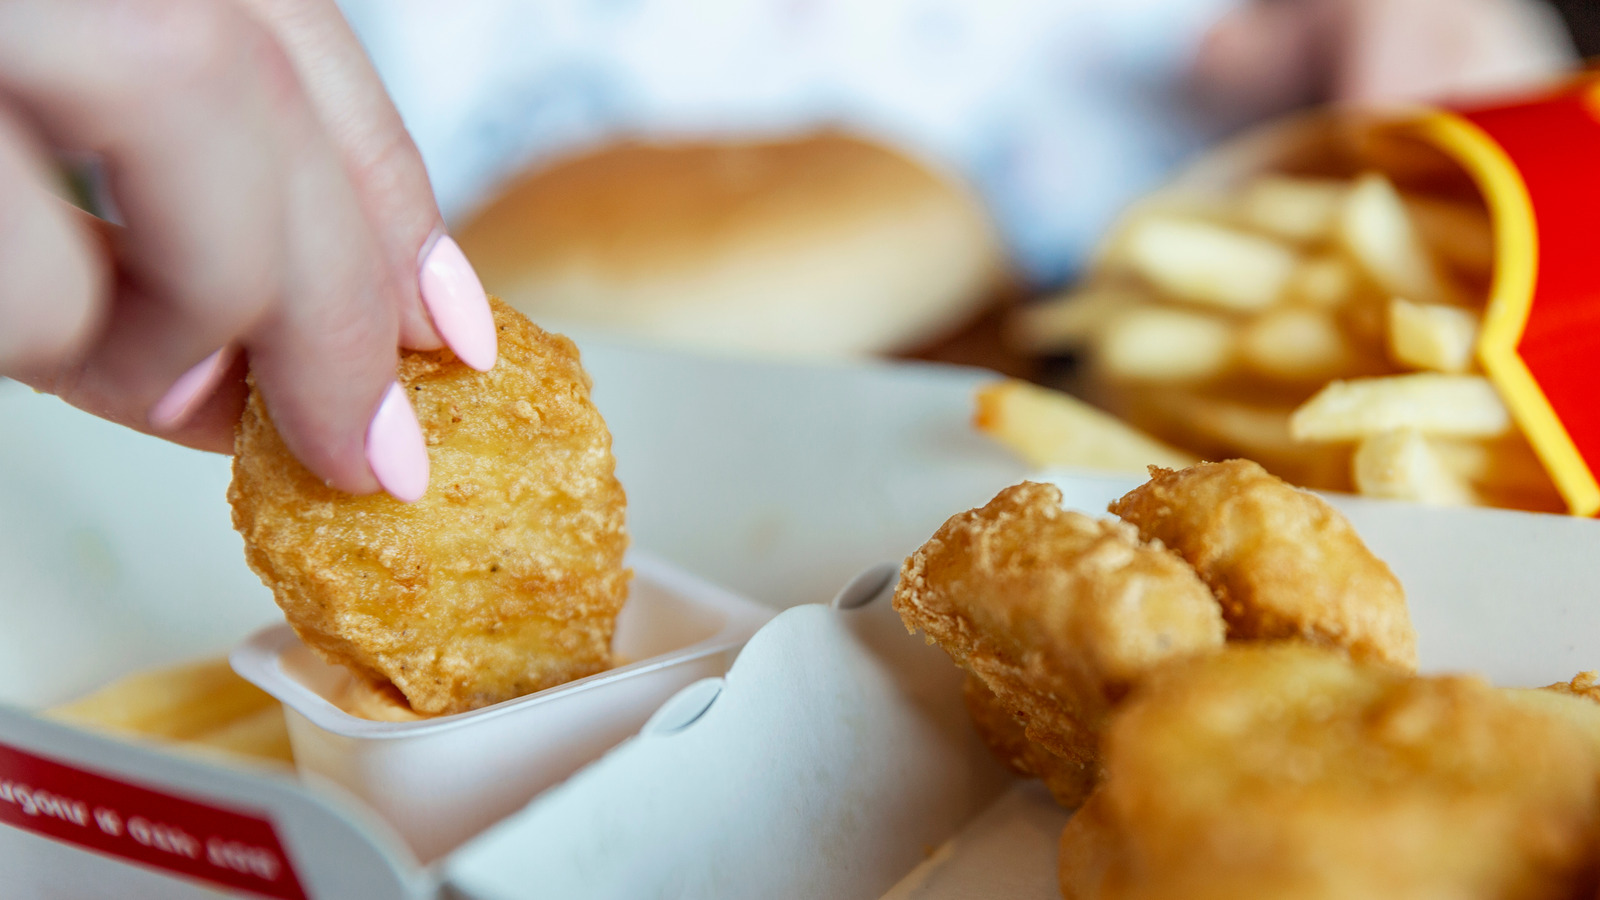 The Truth About What's Really In McDonald's Chicken Nuggets